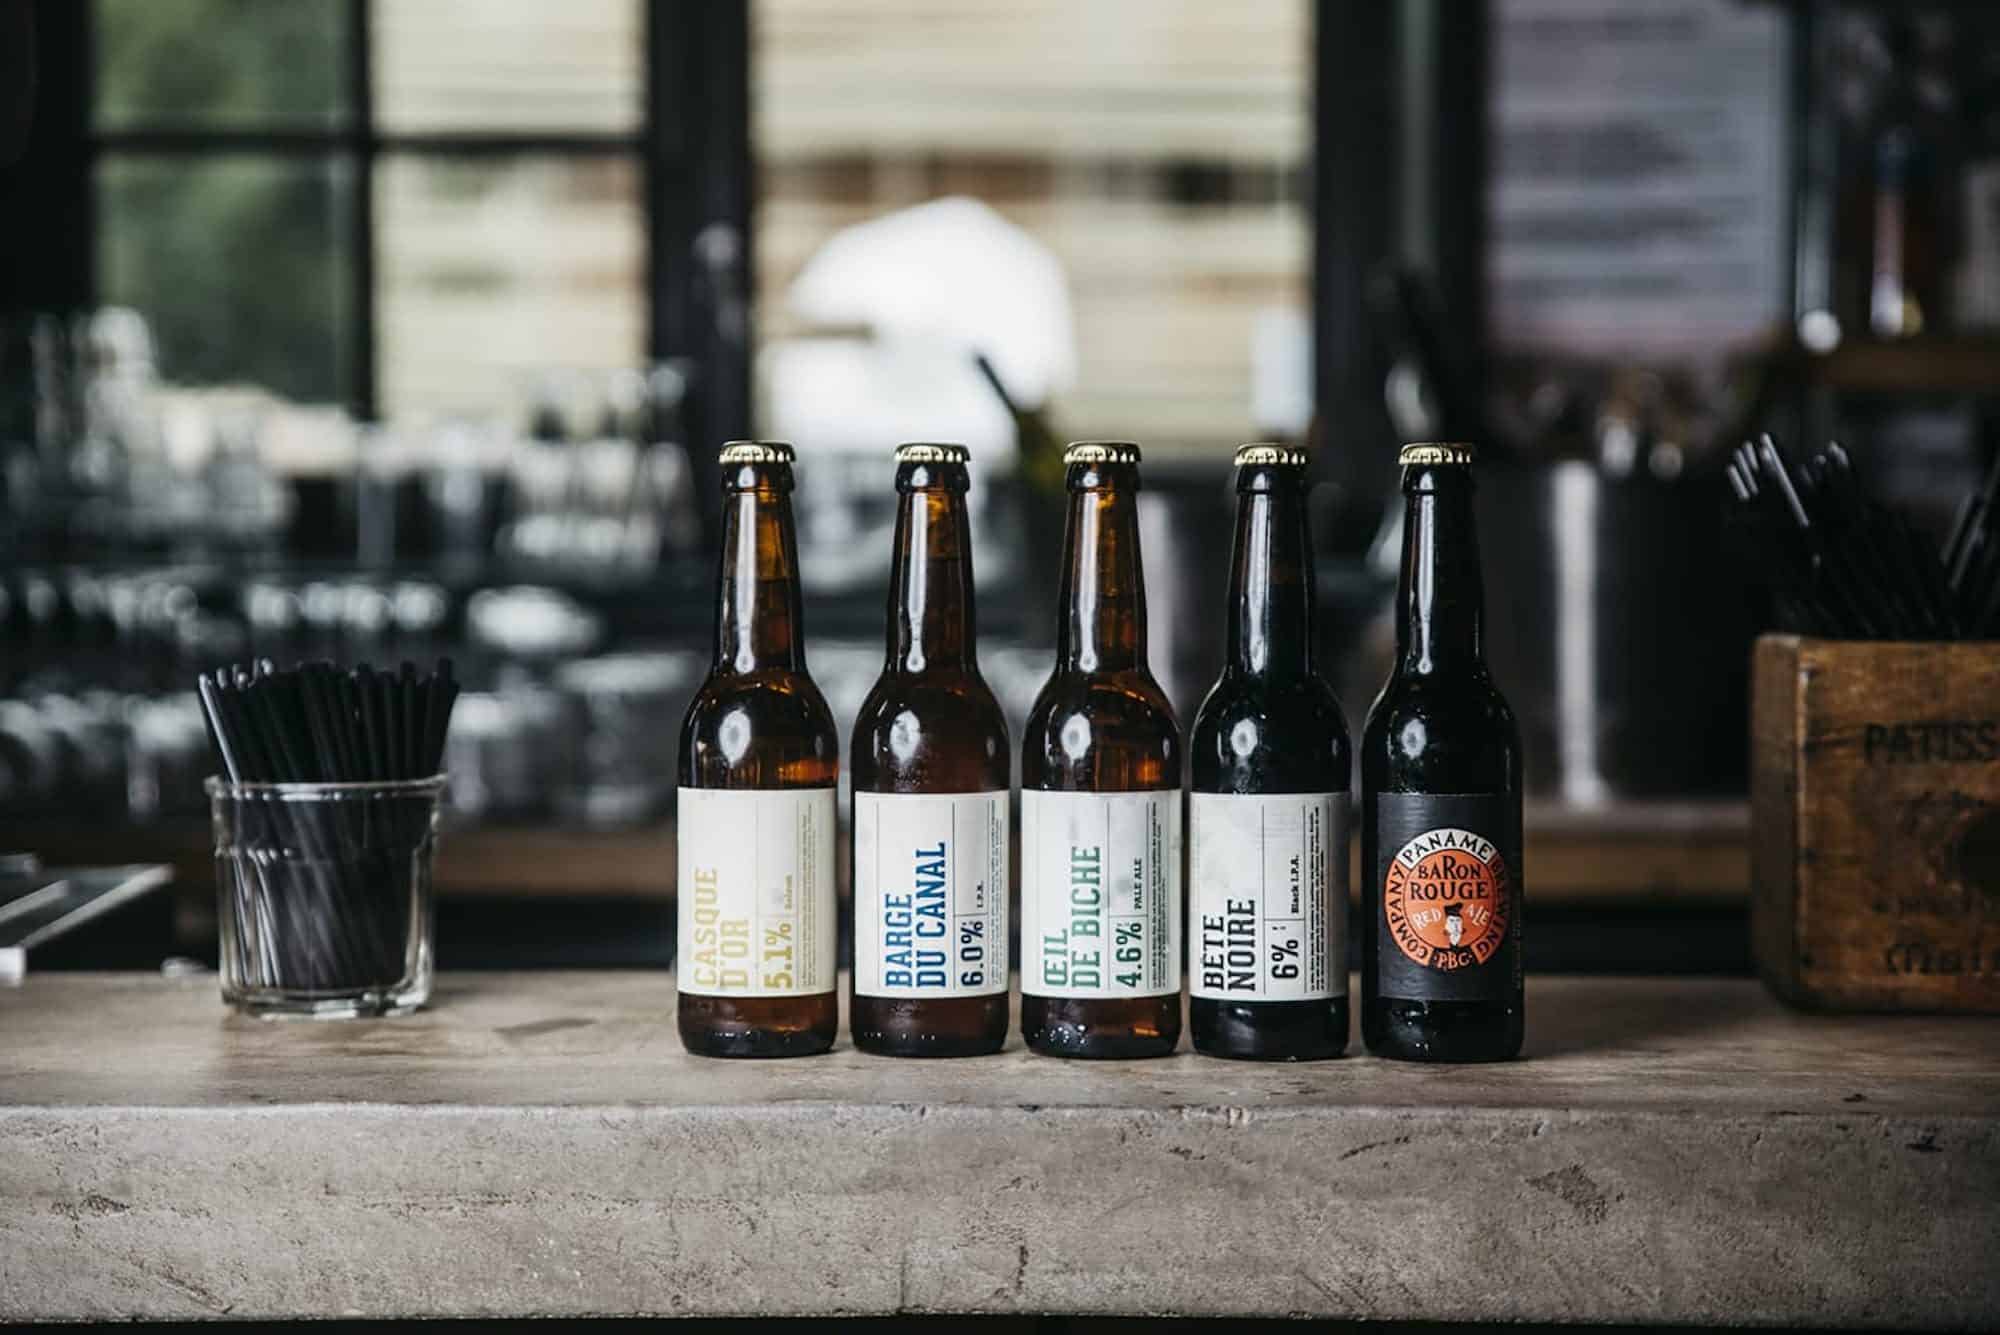 Five artisanal beers lined up on a bar counter